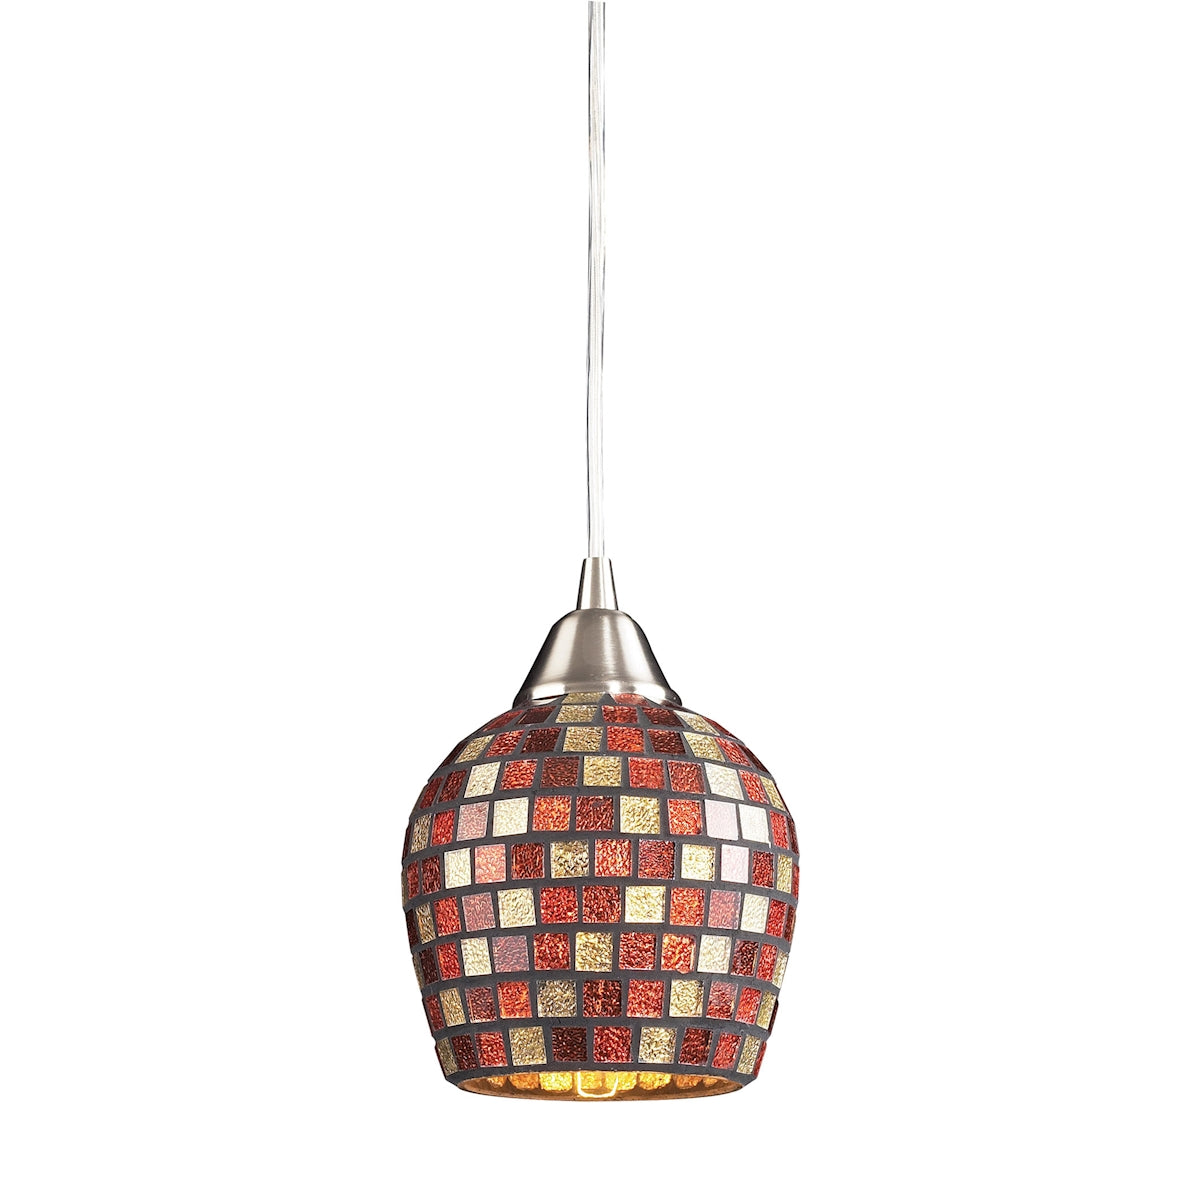 ELK Lighting 528-1MLT Fusion 1-Light Mini Pendant in Satin Nickel with Multi-colored Mosaic Glass